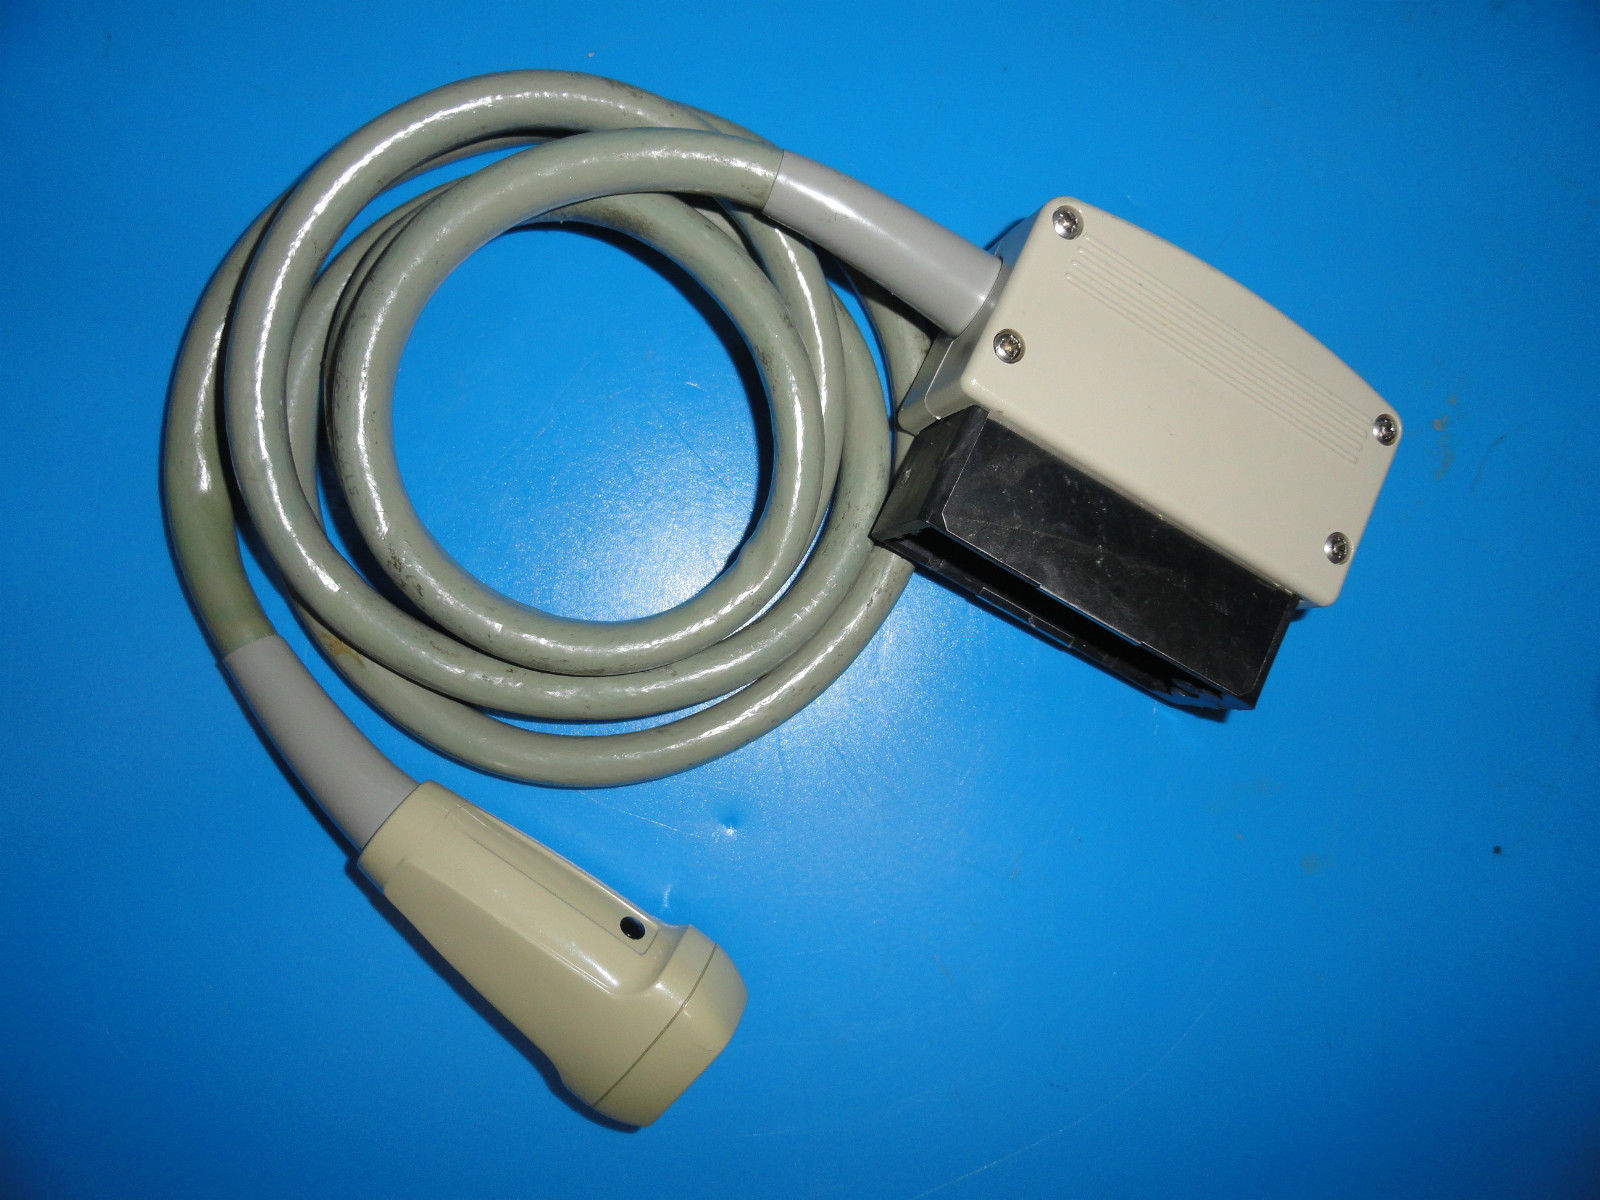 a close up of a cable connected to a device